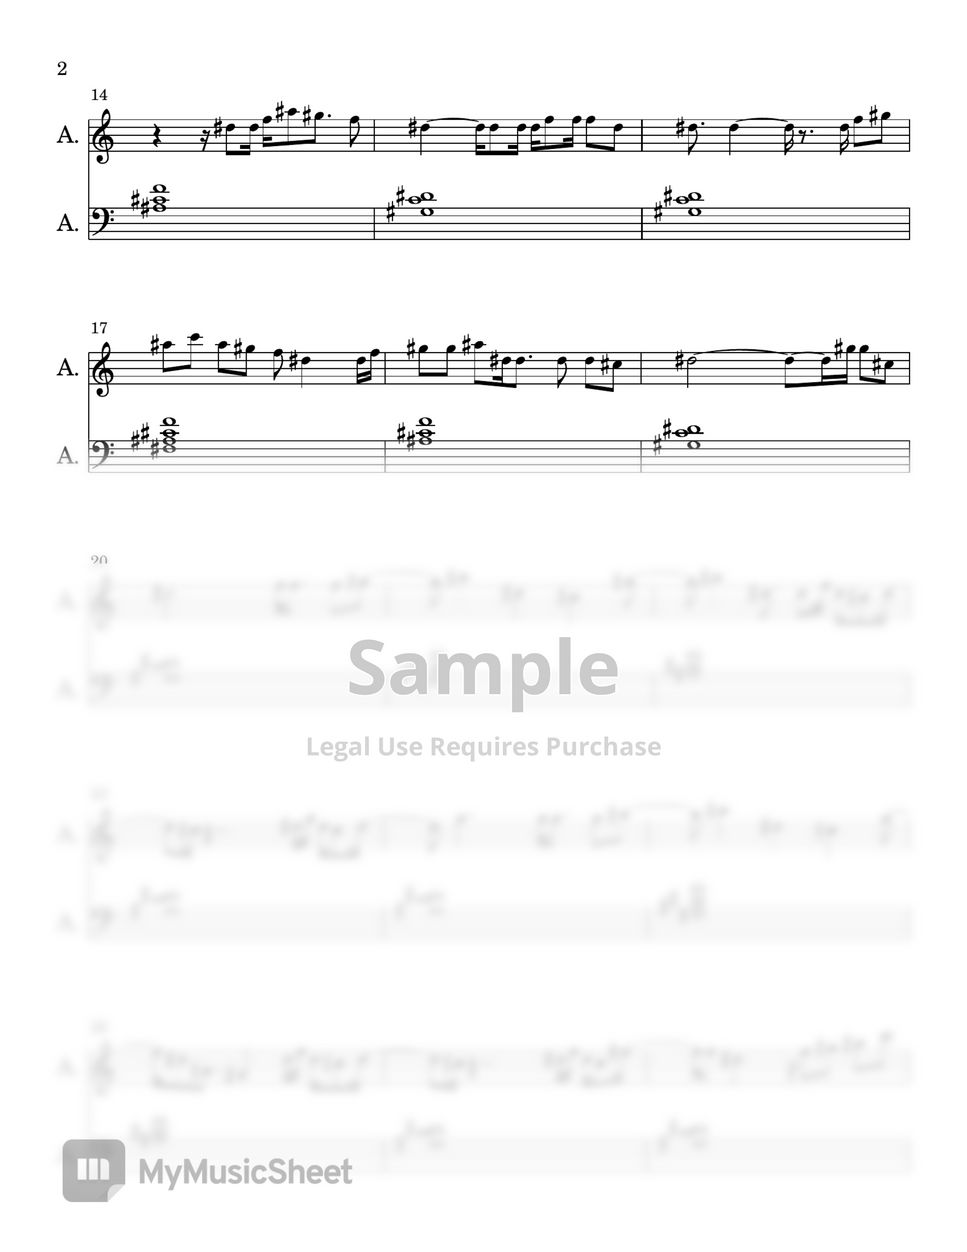 Libianca - People (EASY PIANO SHEET) by Synthly